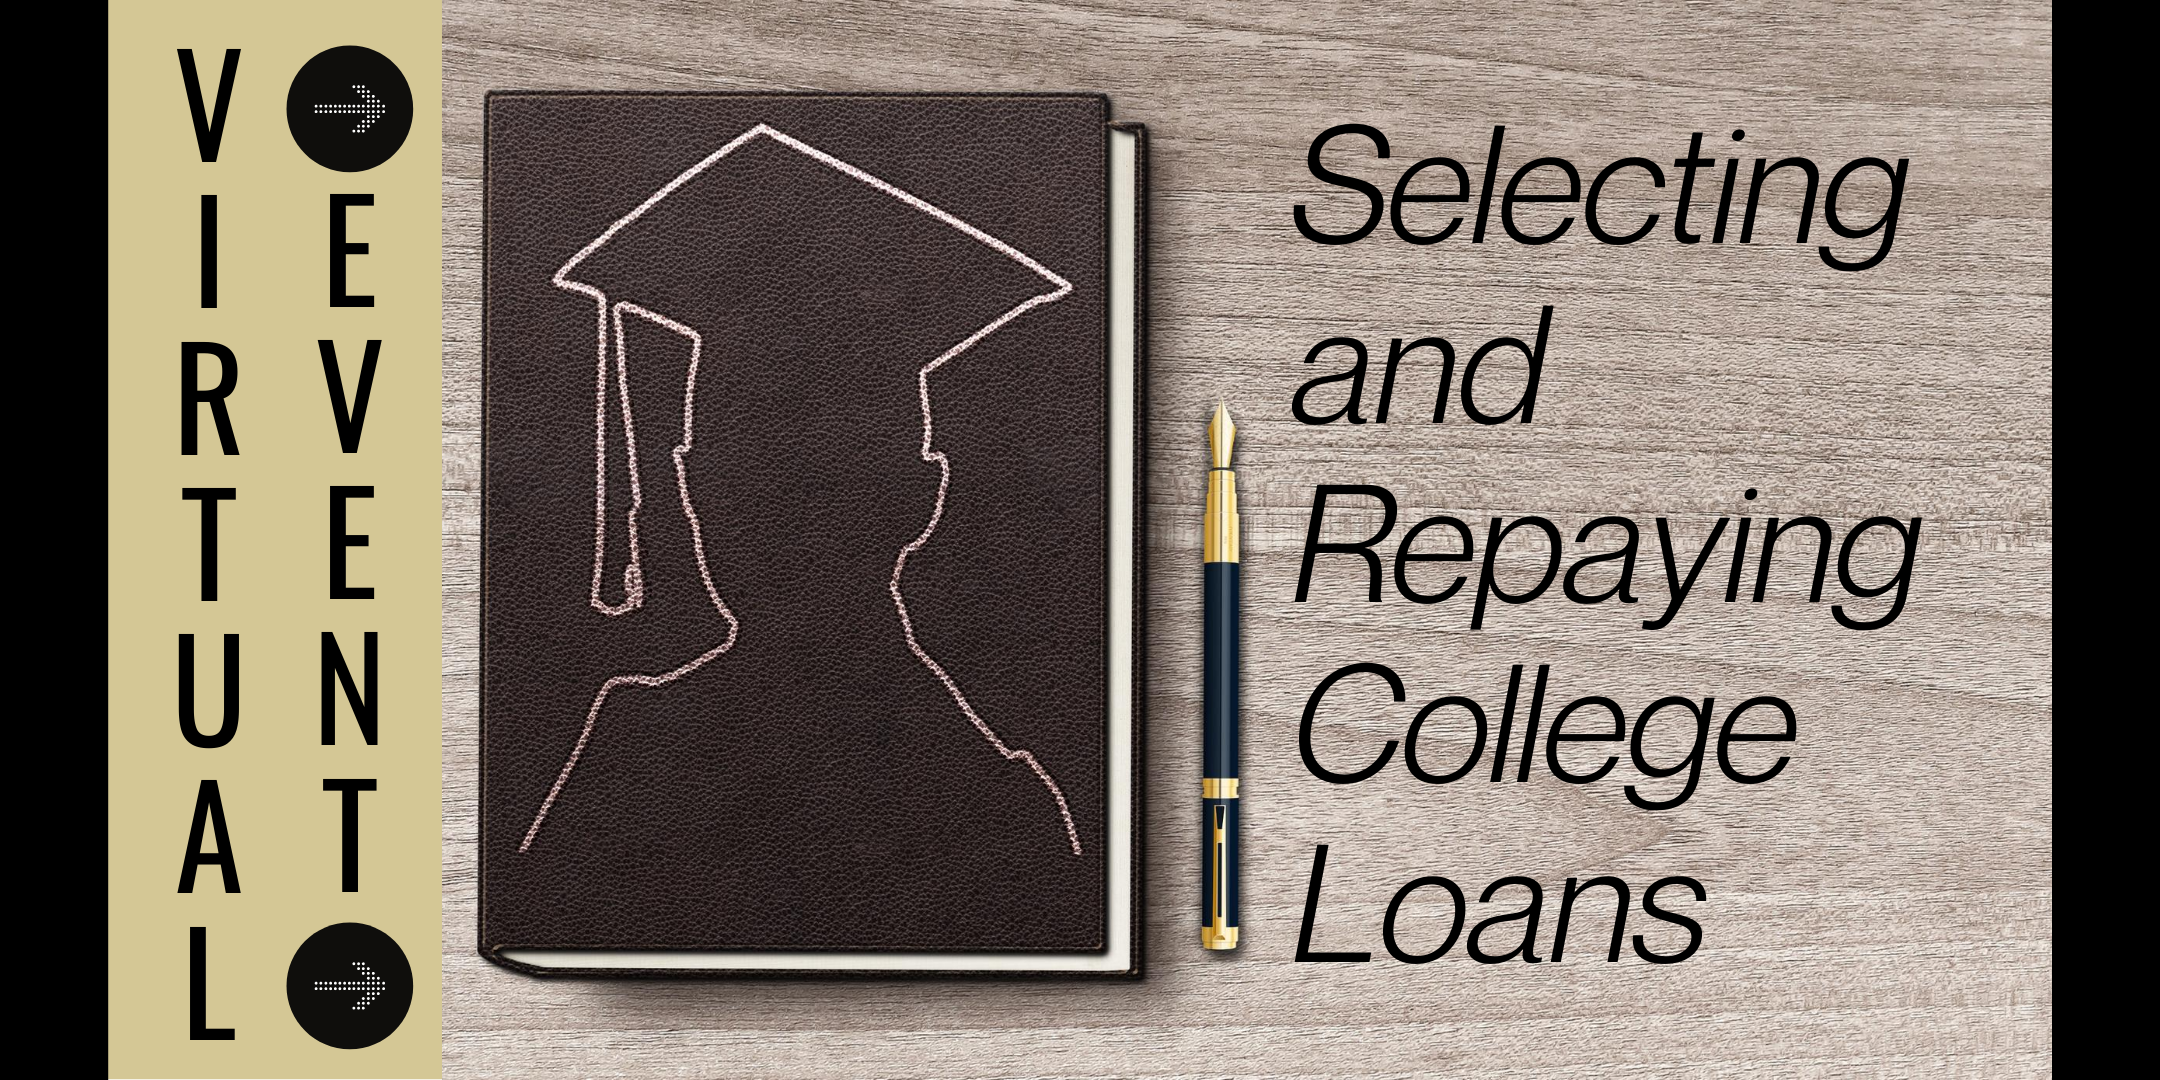 Selecting and Repaying College Loans image